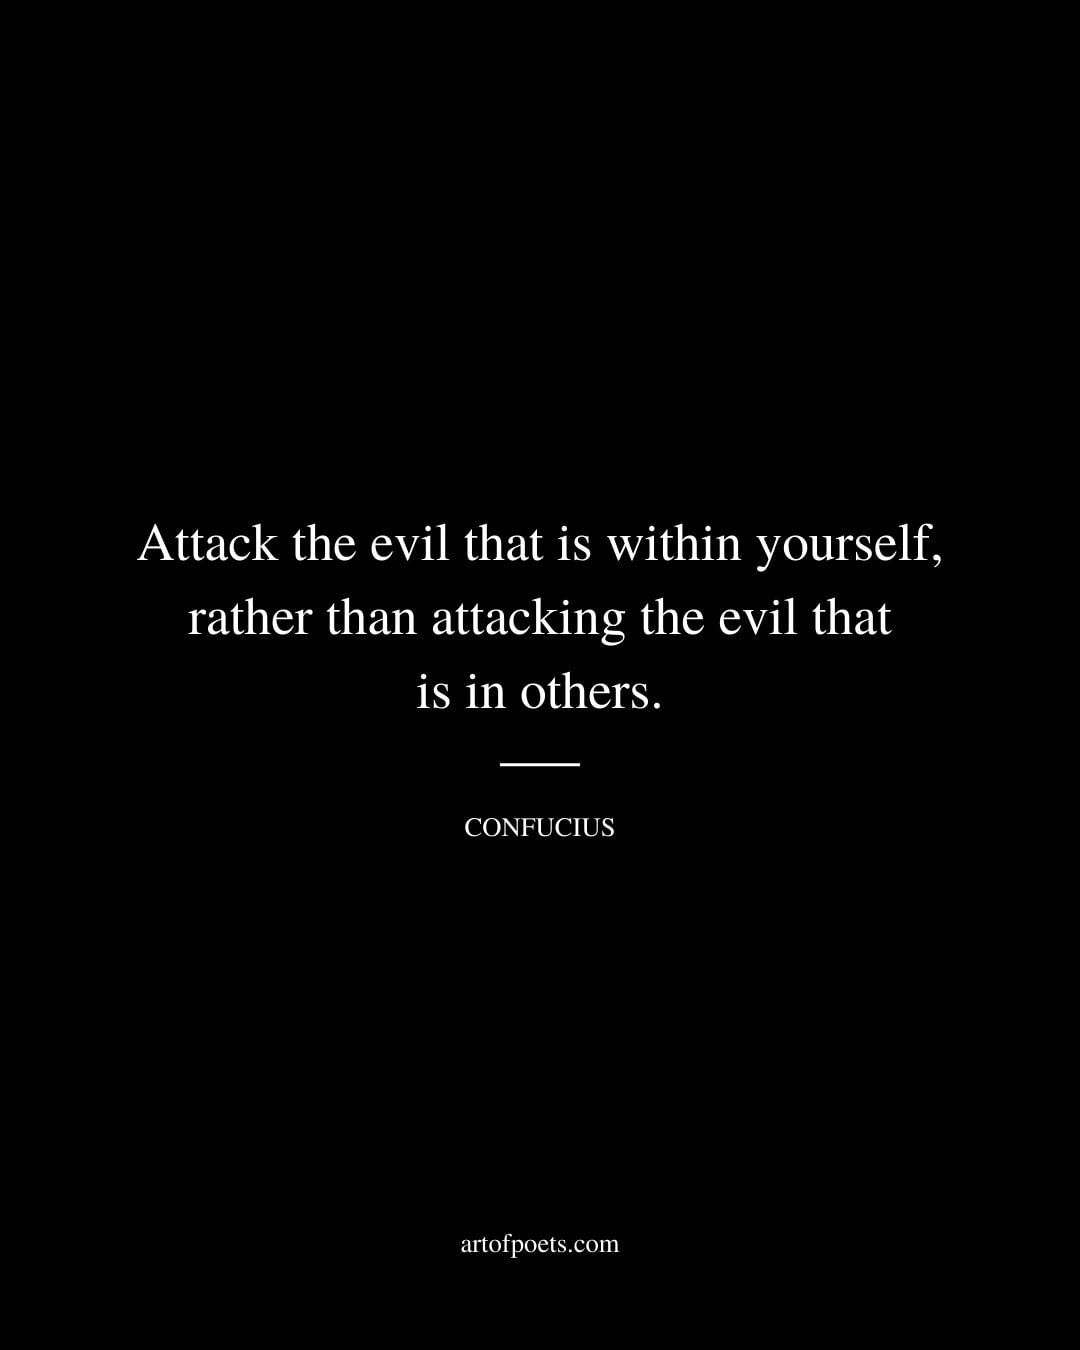 Attack the evil that is within yourself rather than attacking the evil that is in others